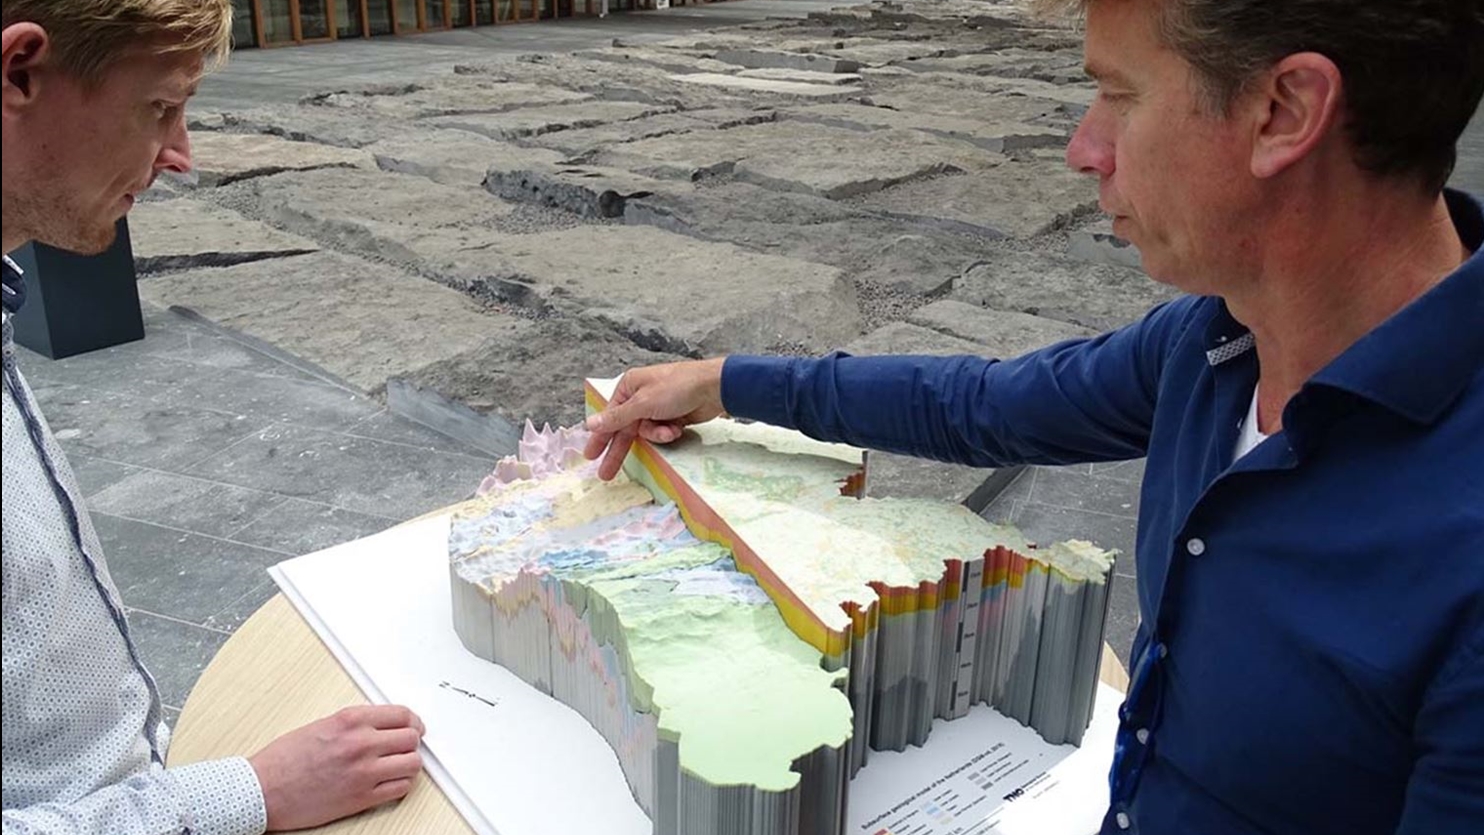 TNO employee uses a model to show what the subsurface looks like.